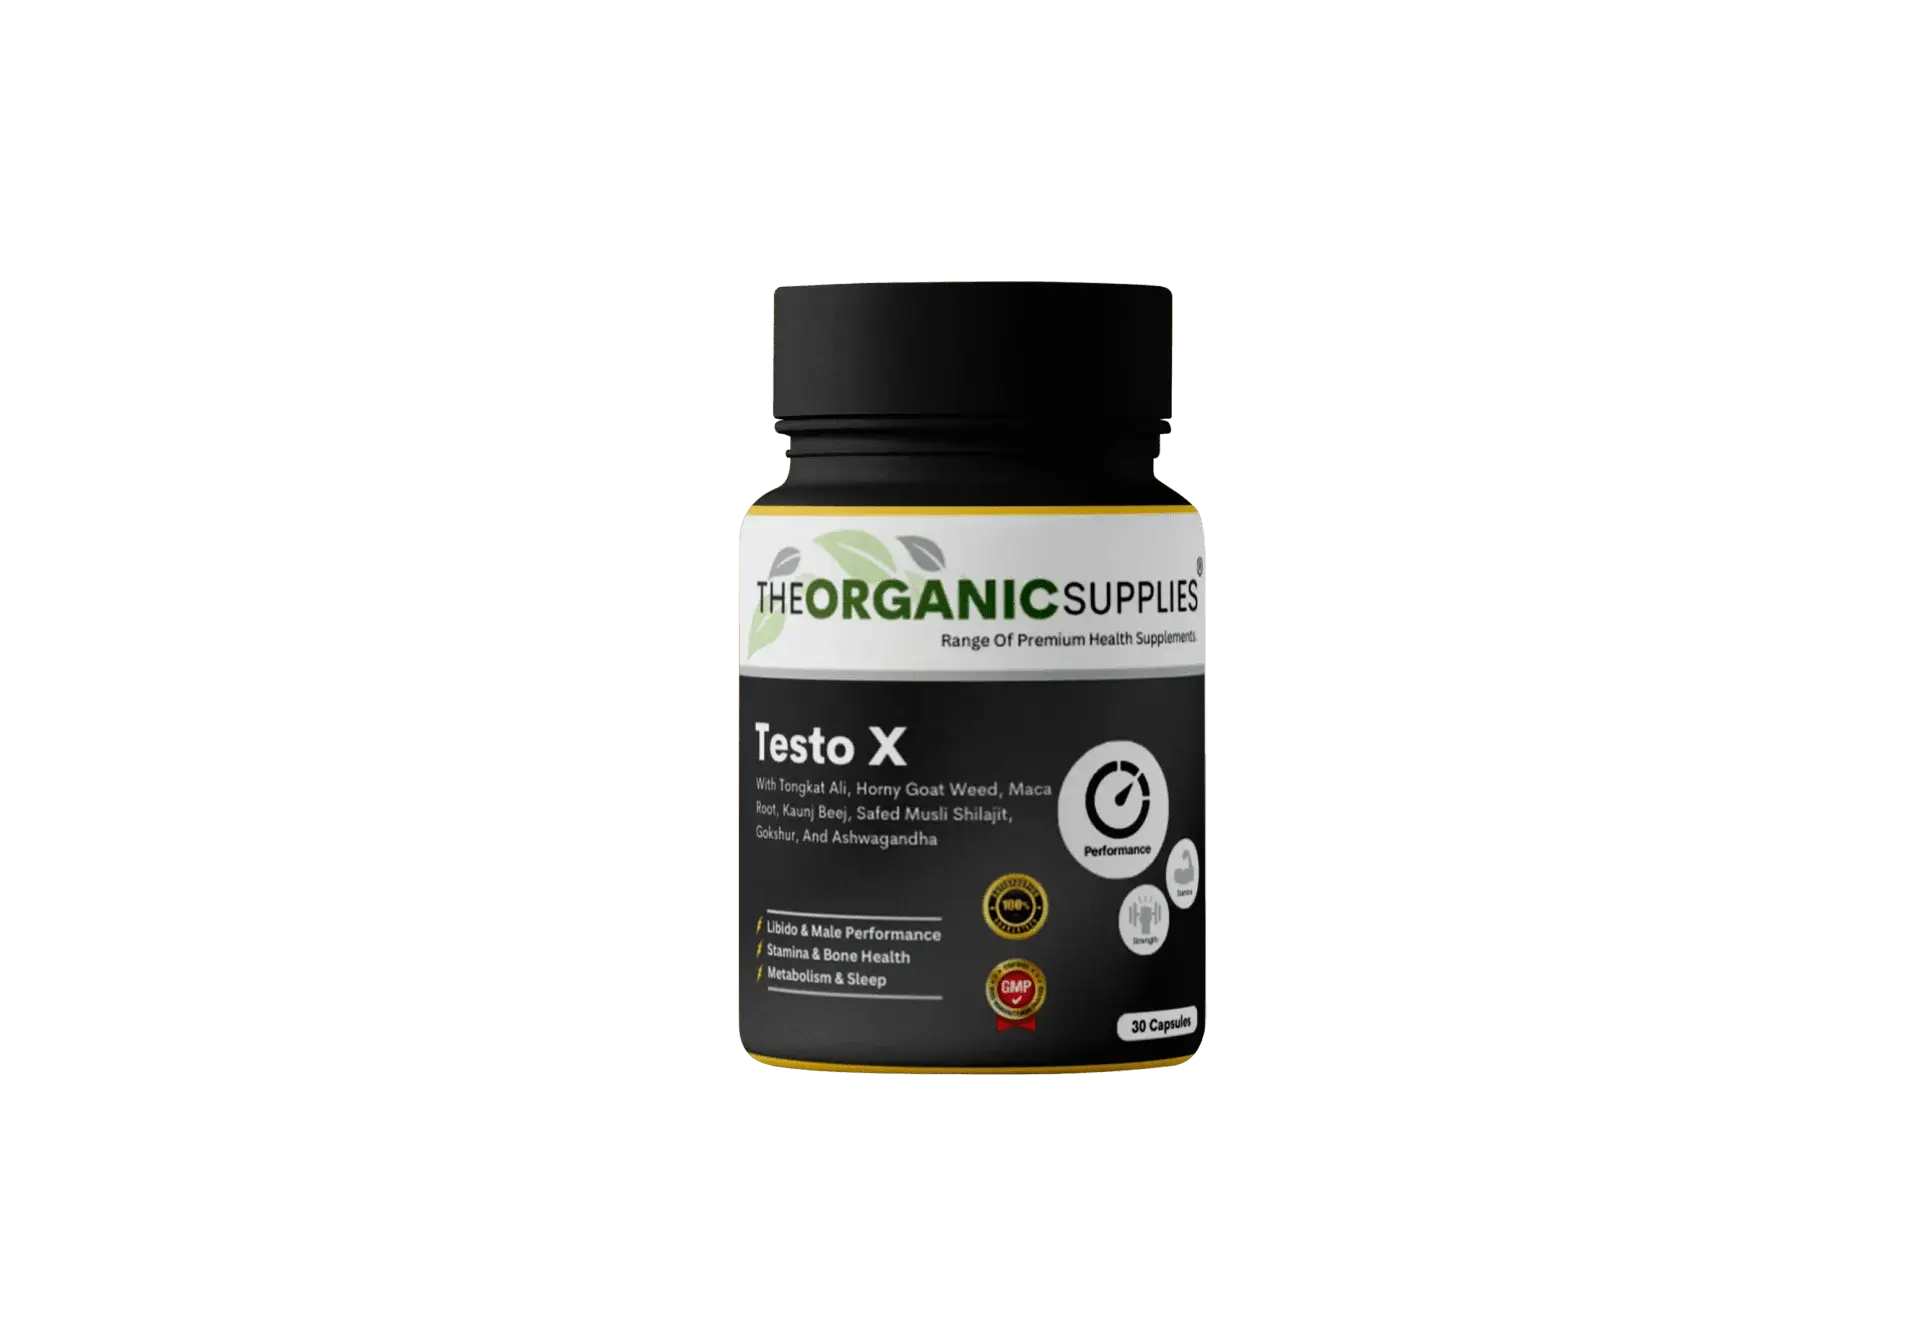 A photorealistic image of a bottle of TheOrganicSupplies testo X supplements.  